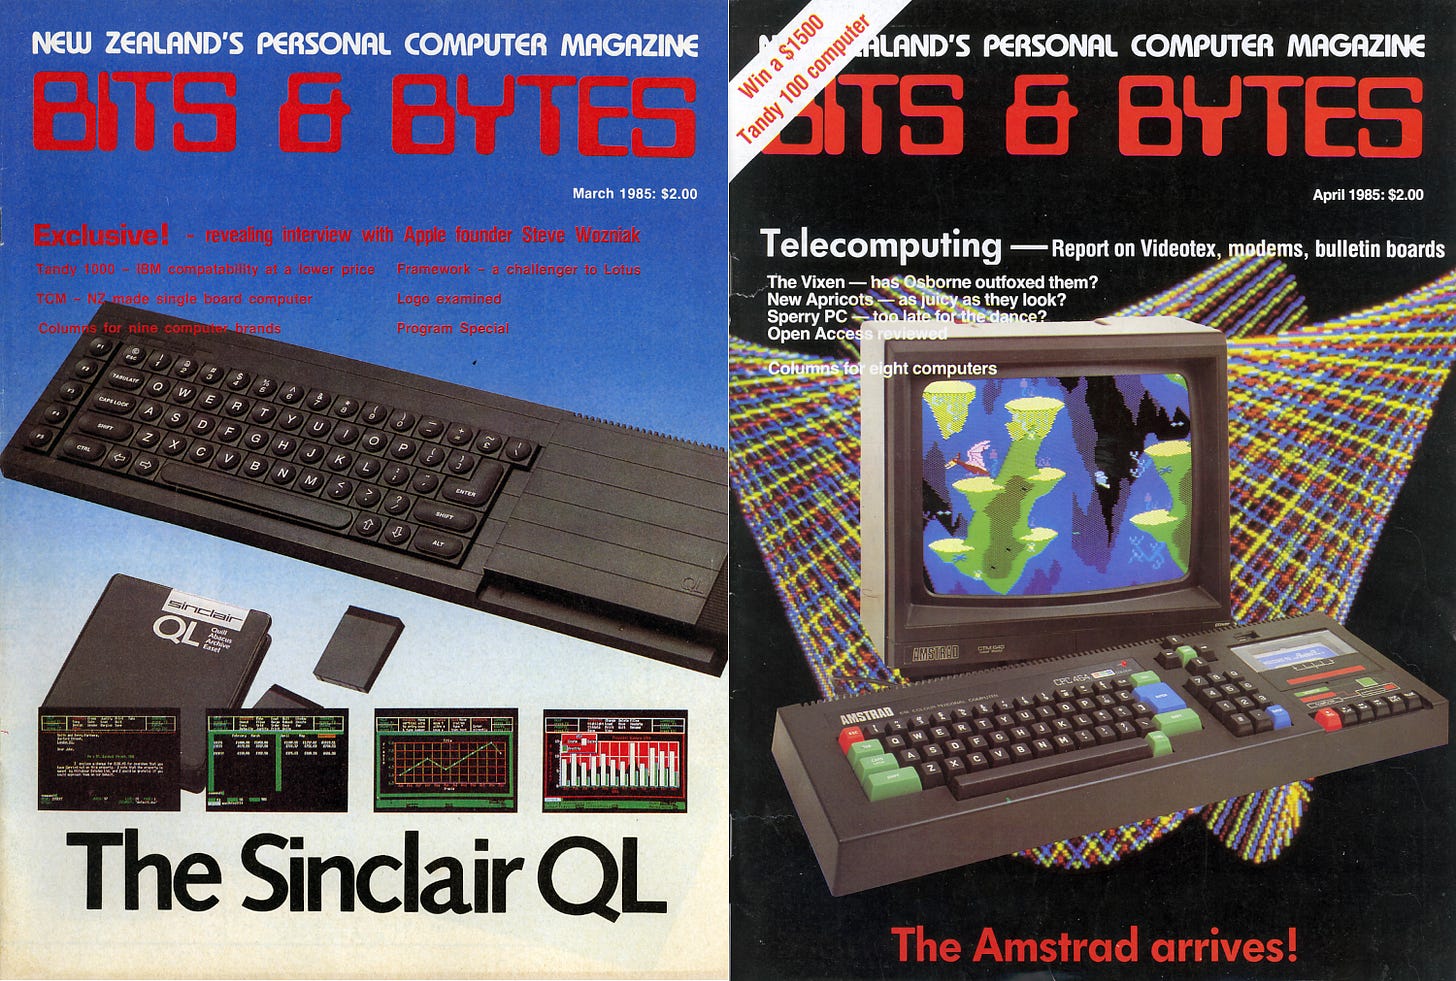 March and April 1985 issues of Bits & Bytes from New Zealand